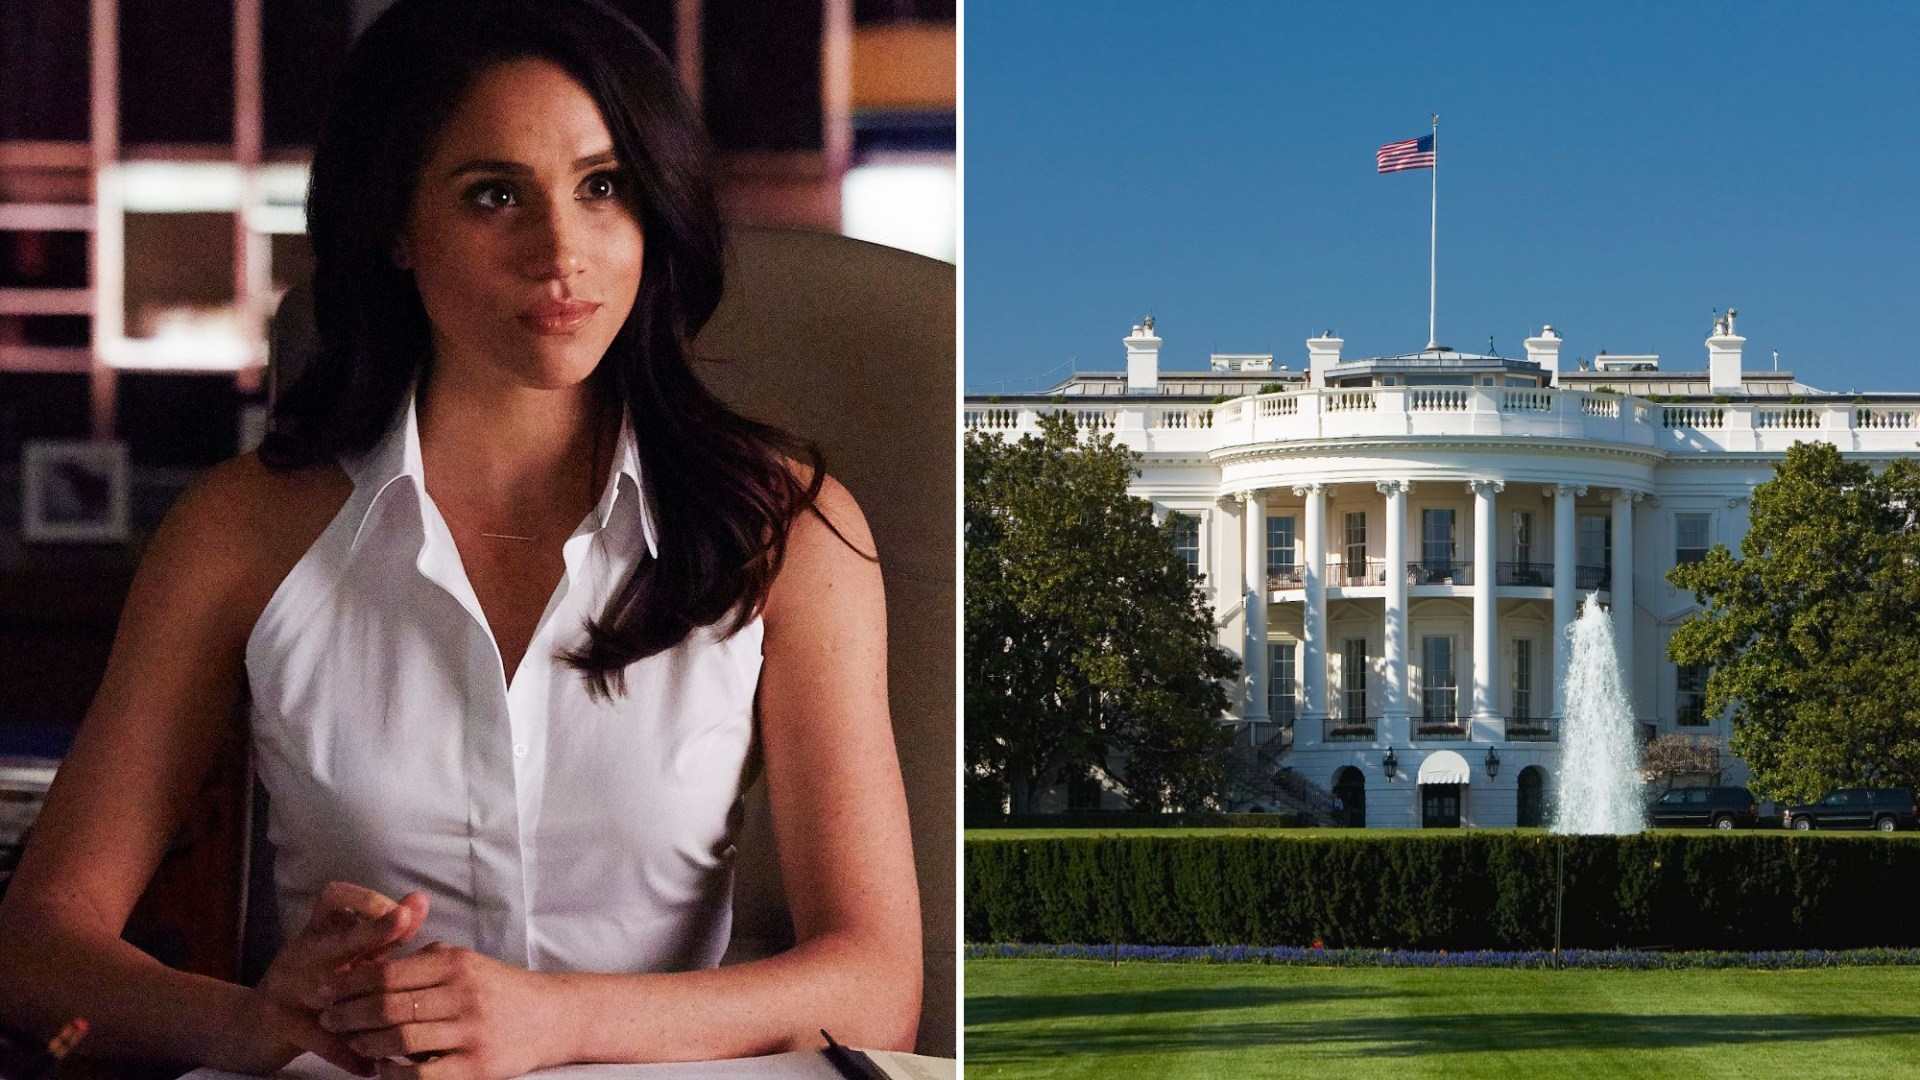 I starred with Meghan Markle on Suits  shes on way to White House & should be a senatorroyal feud wont stand in way [Video]